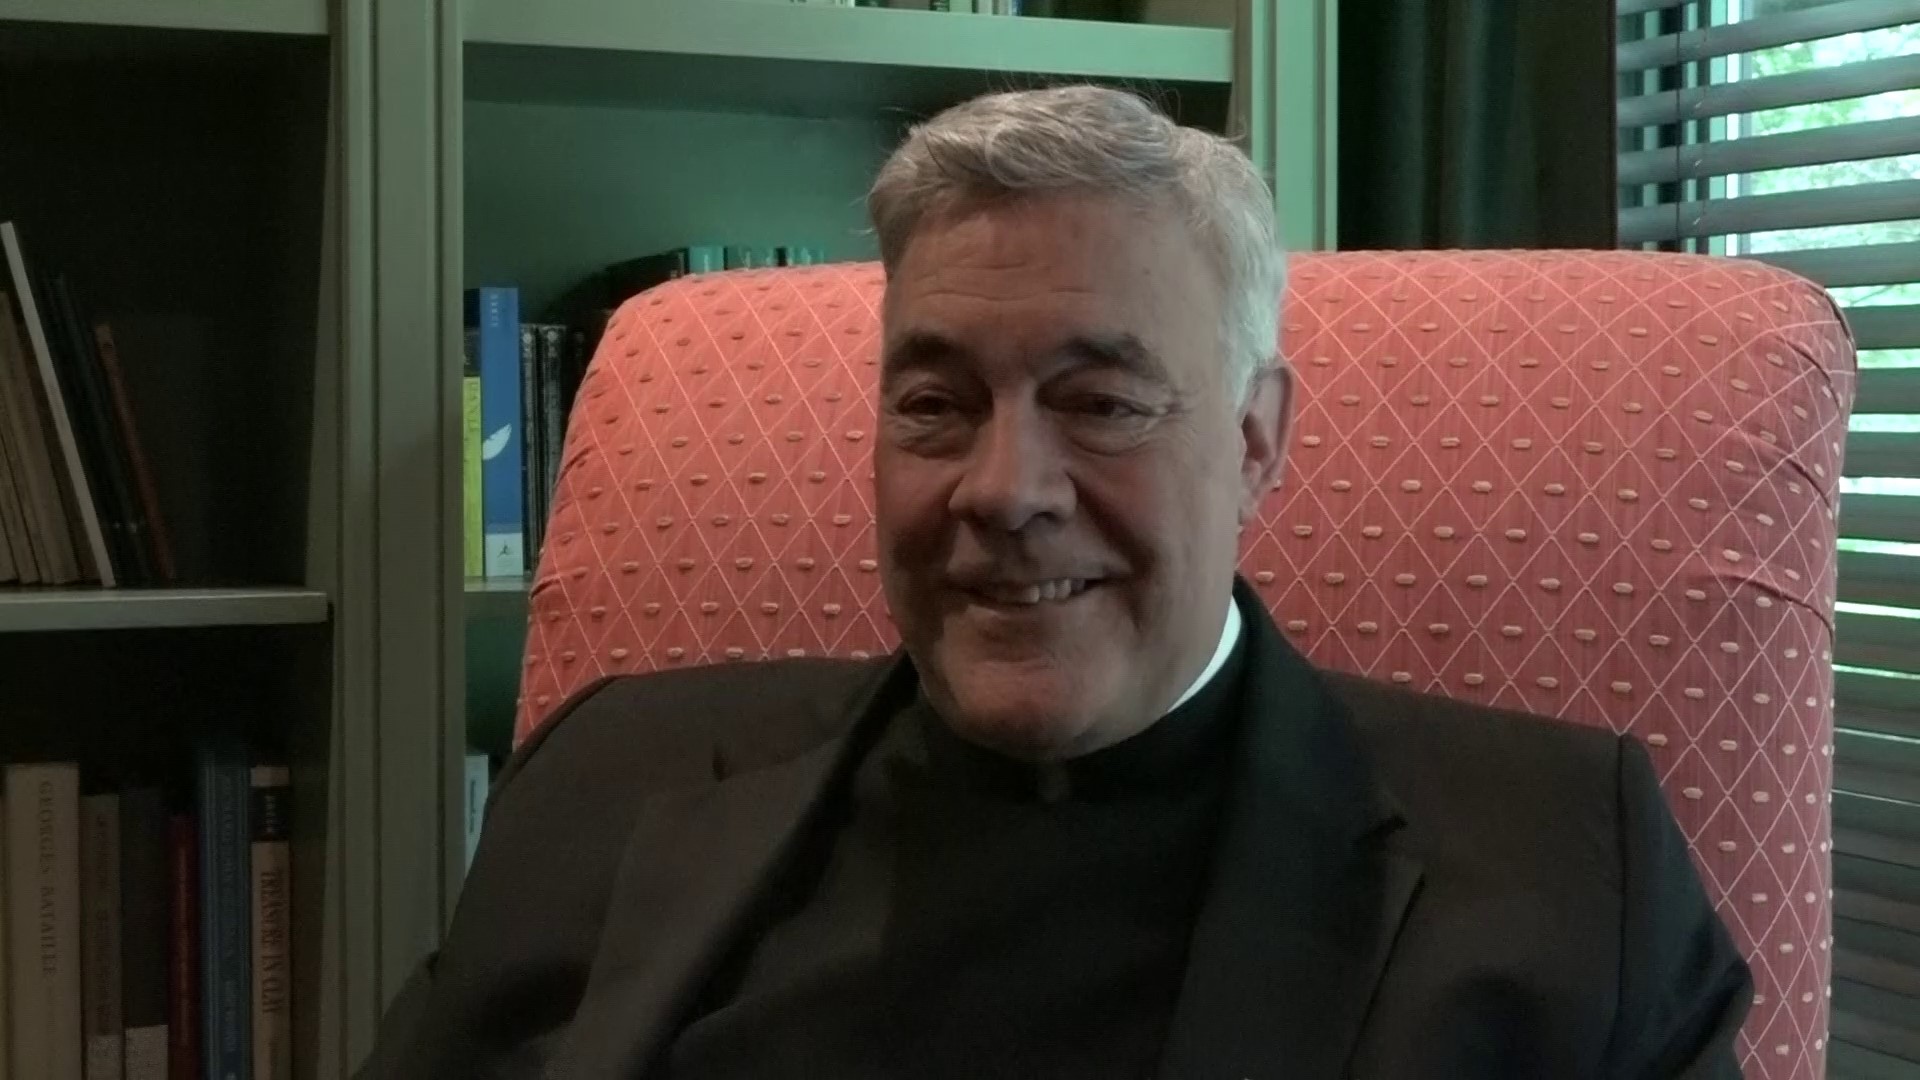 Father Robert Sirico, founder of the Acton Institute in Grand Rapids, says he and his brother, Tony, had mutual admiration for each other's work.